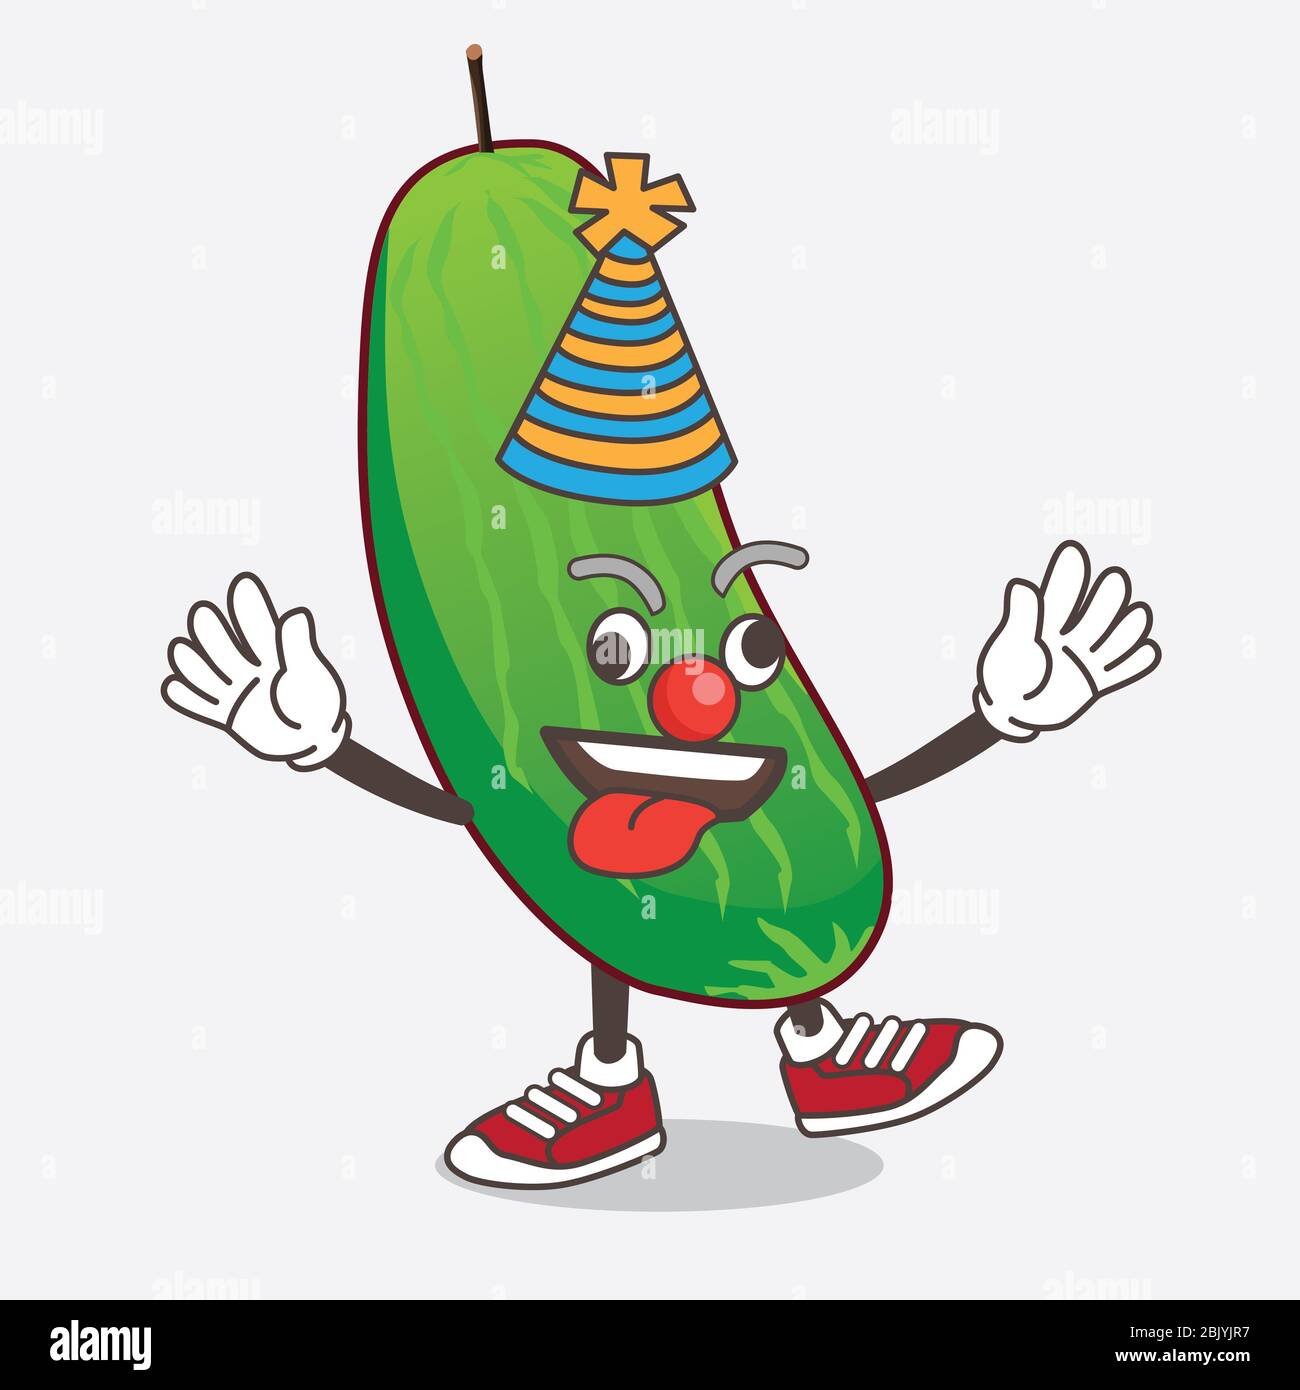 An illustration of Cucumber cartoon mascot character as funny clown Stock Photo